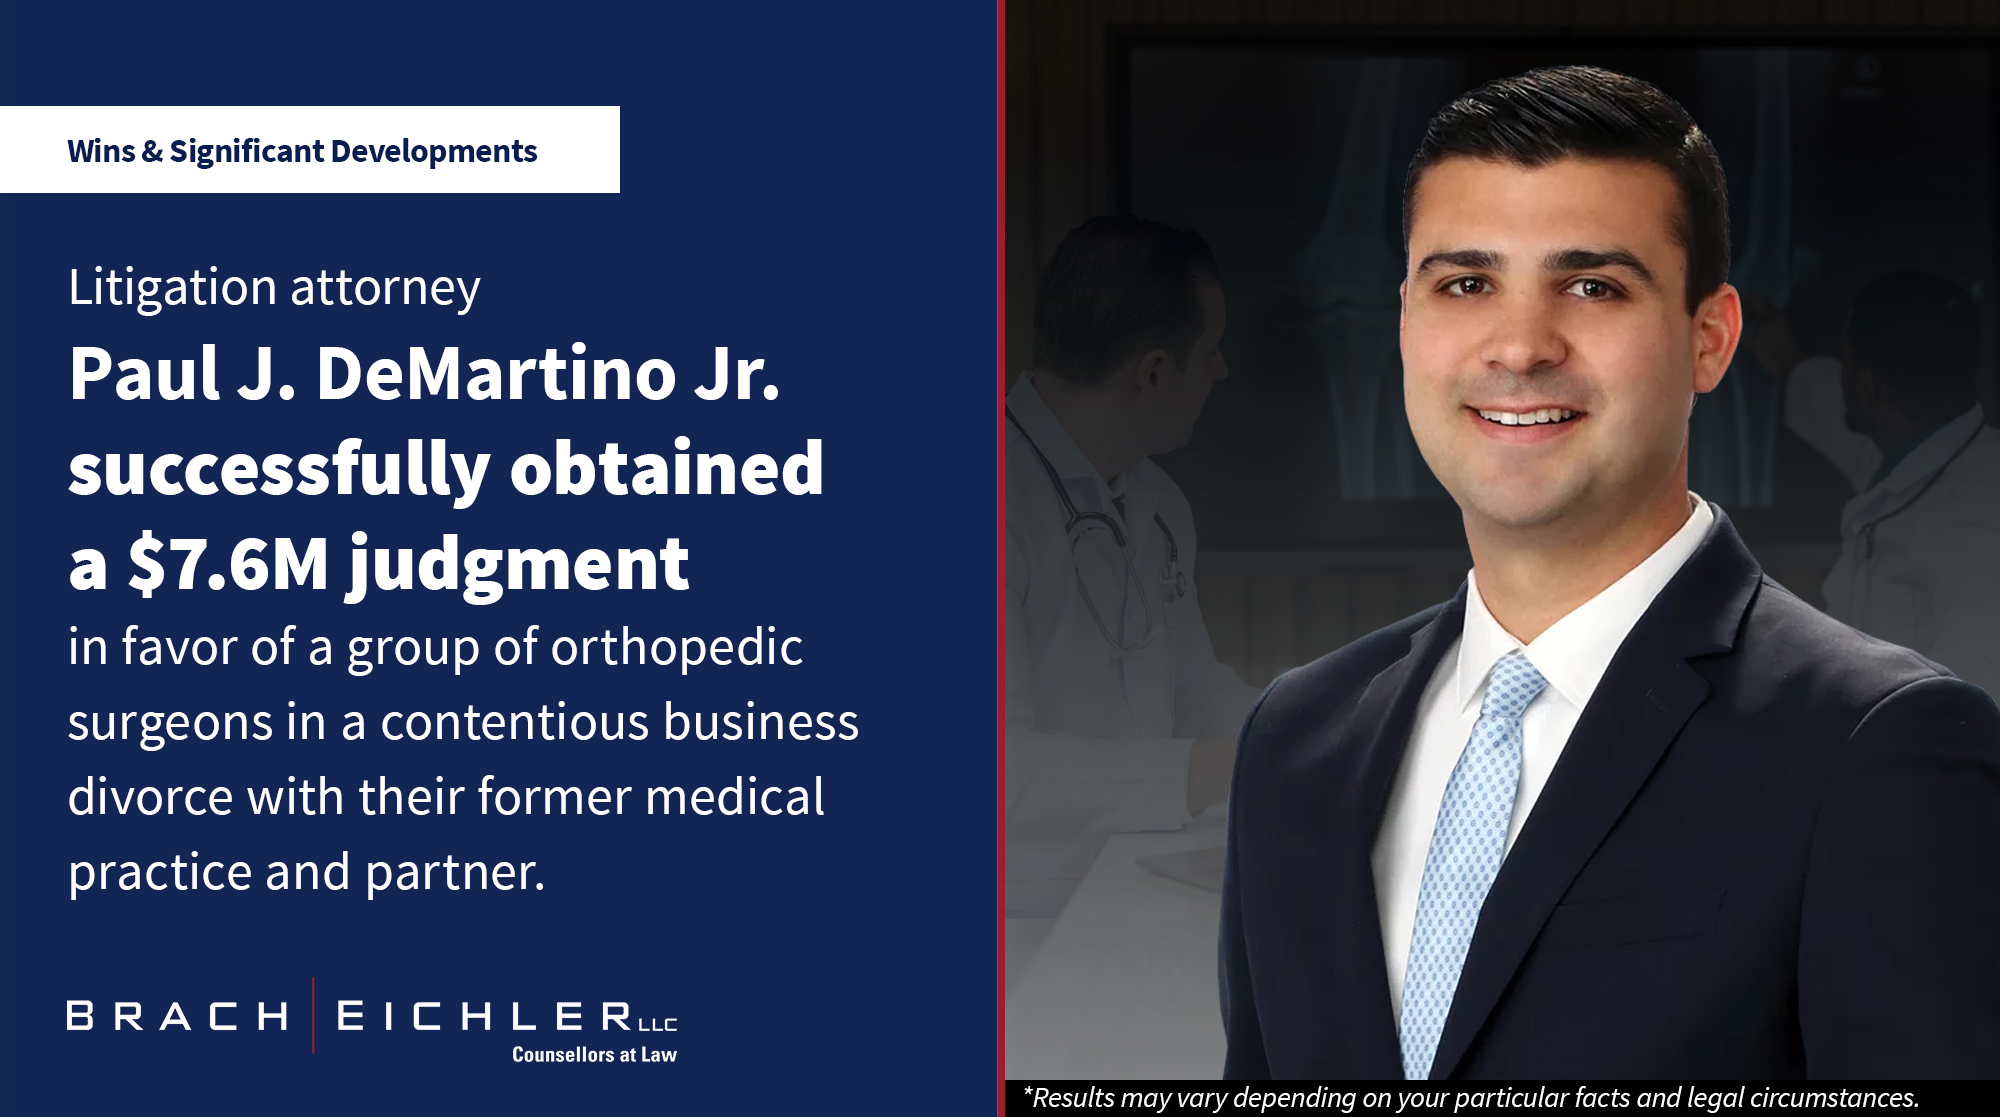 Paul J. DeMartino Jr. successfully obtained a $7.6M judgment in favor of a group of orthopedic surgeons